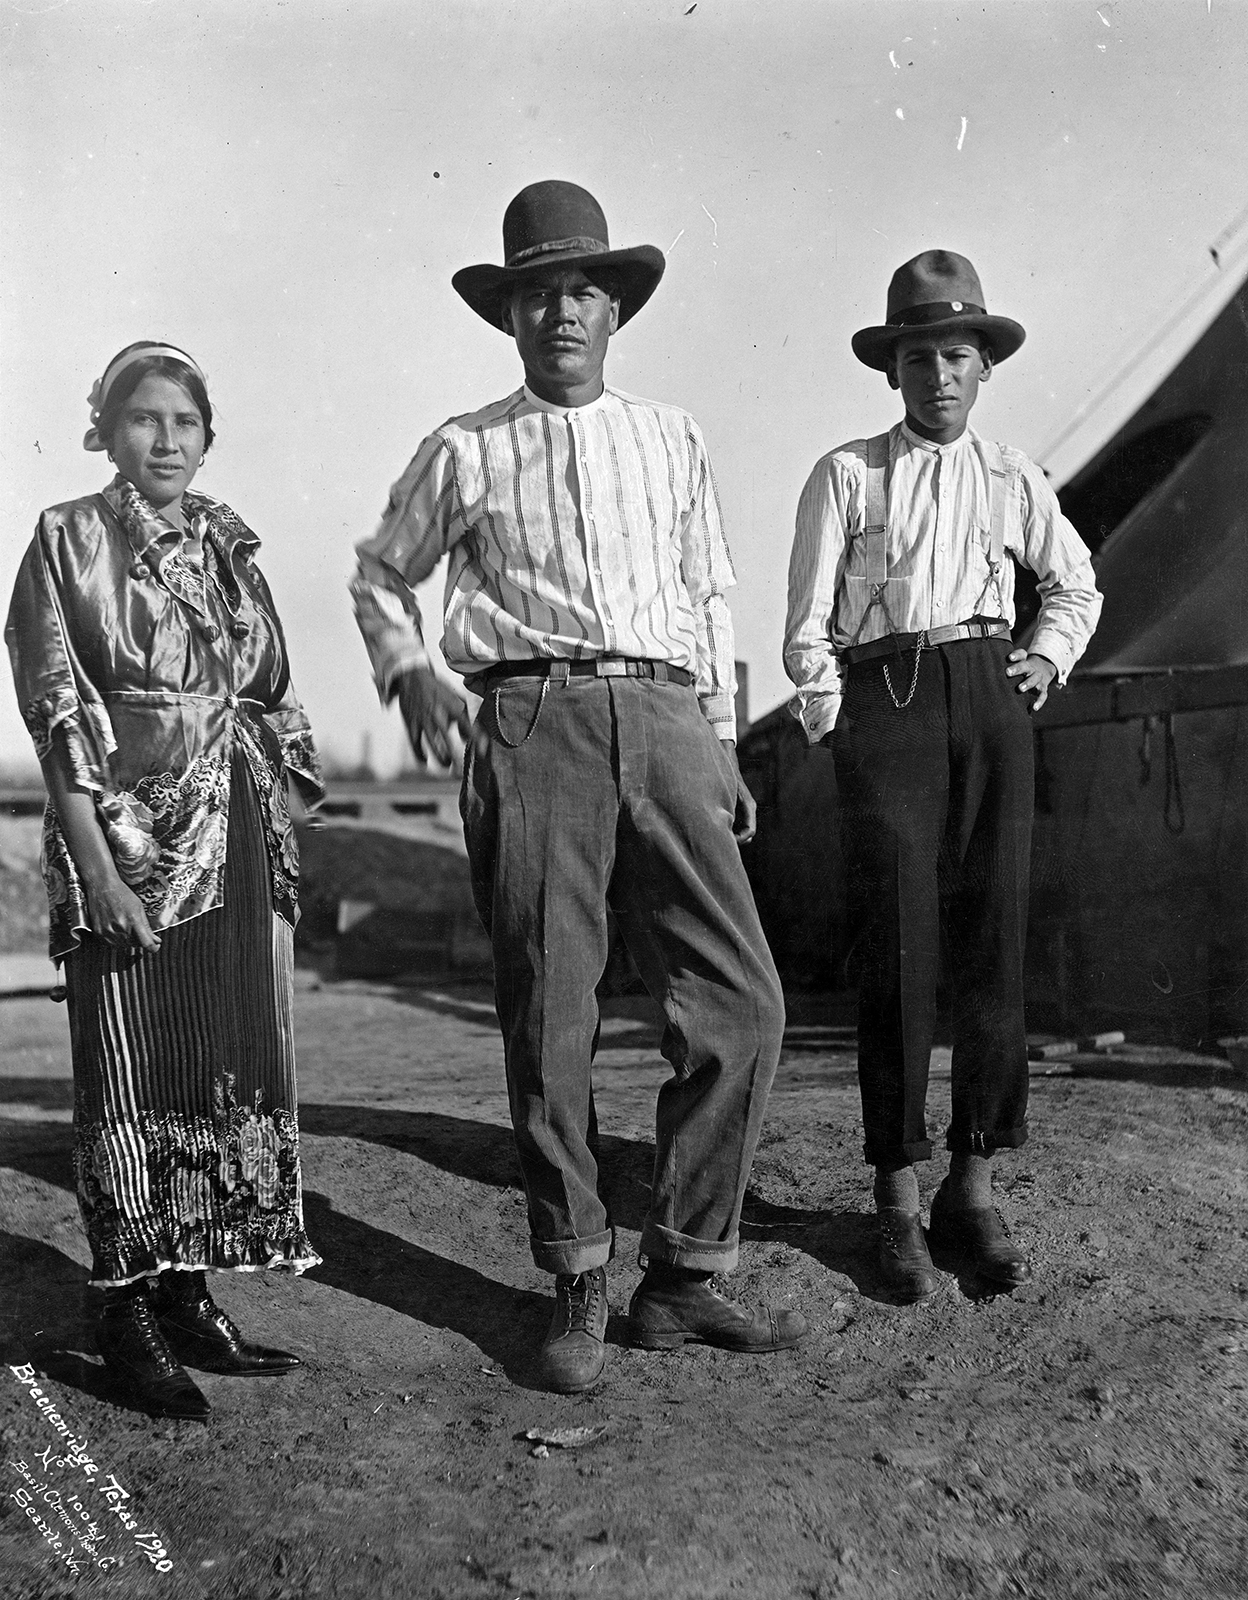 A Mexican woman and two Mexican men, photographed in Breckenridge, Texas, 1920. The three are standing, the woman to the farthest left, and the two men next to her, both men wearing hats. The woman is in a pleated skirt with flower pattern at the bottom, and wears a shiny short-sleeved jacket. 